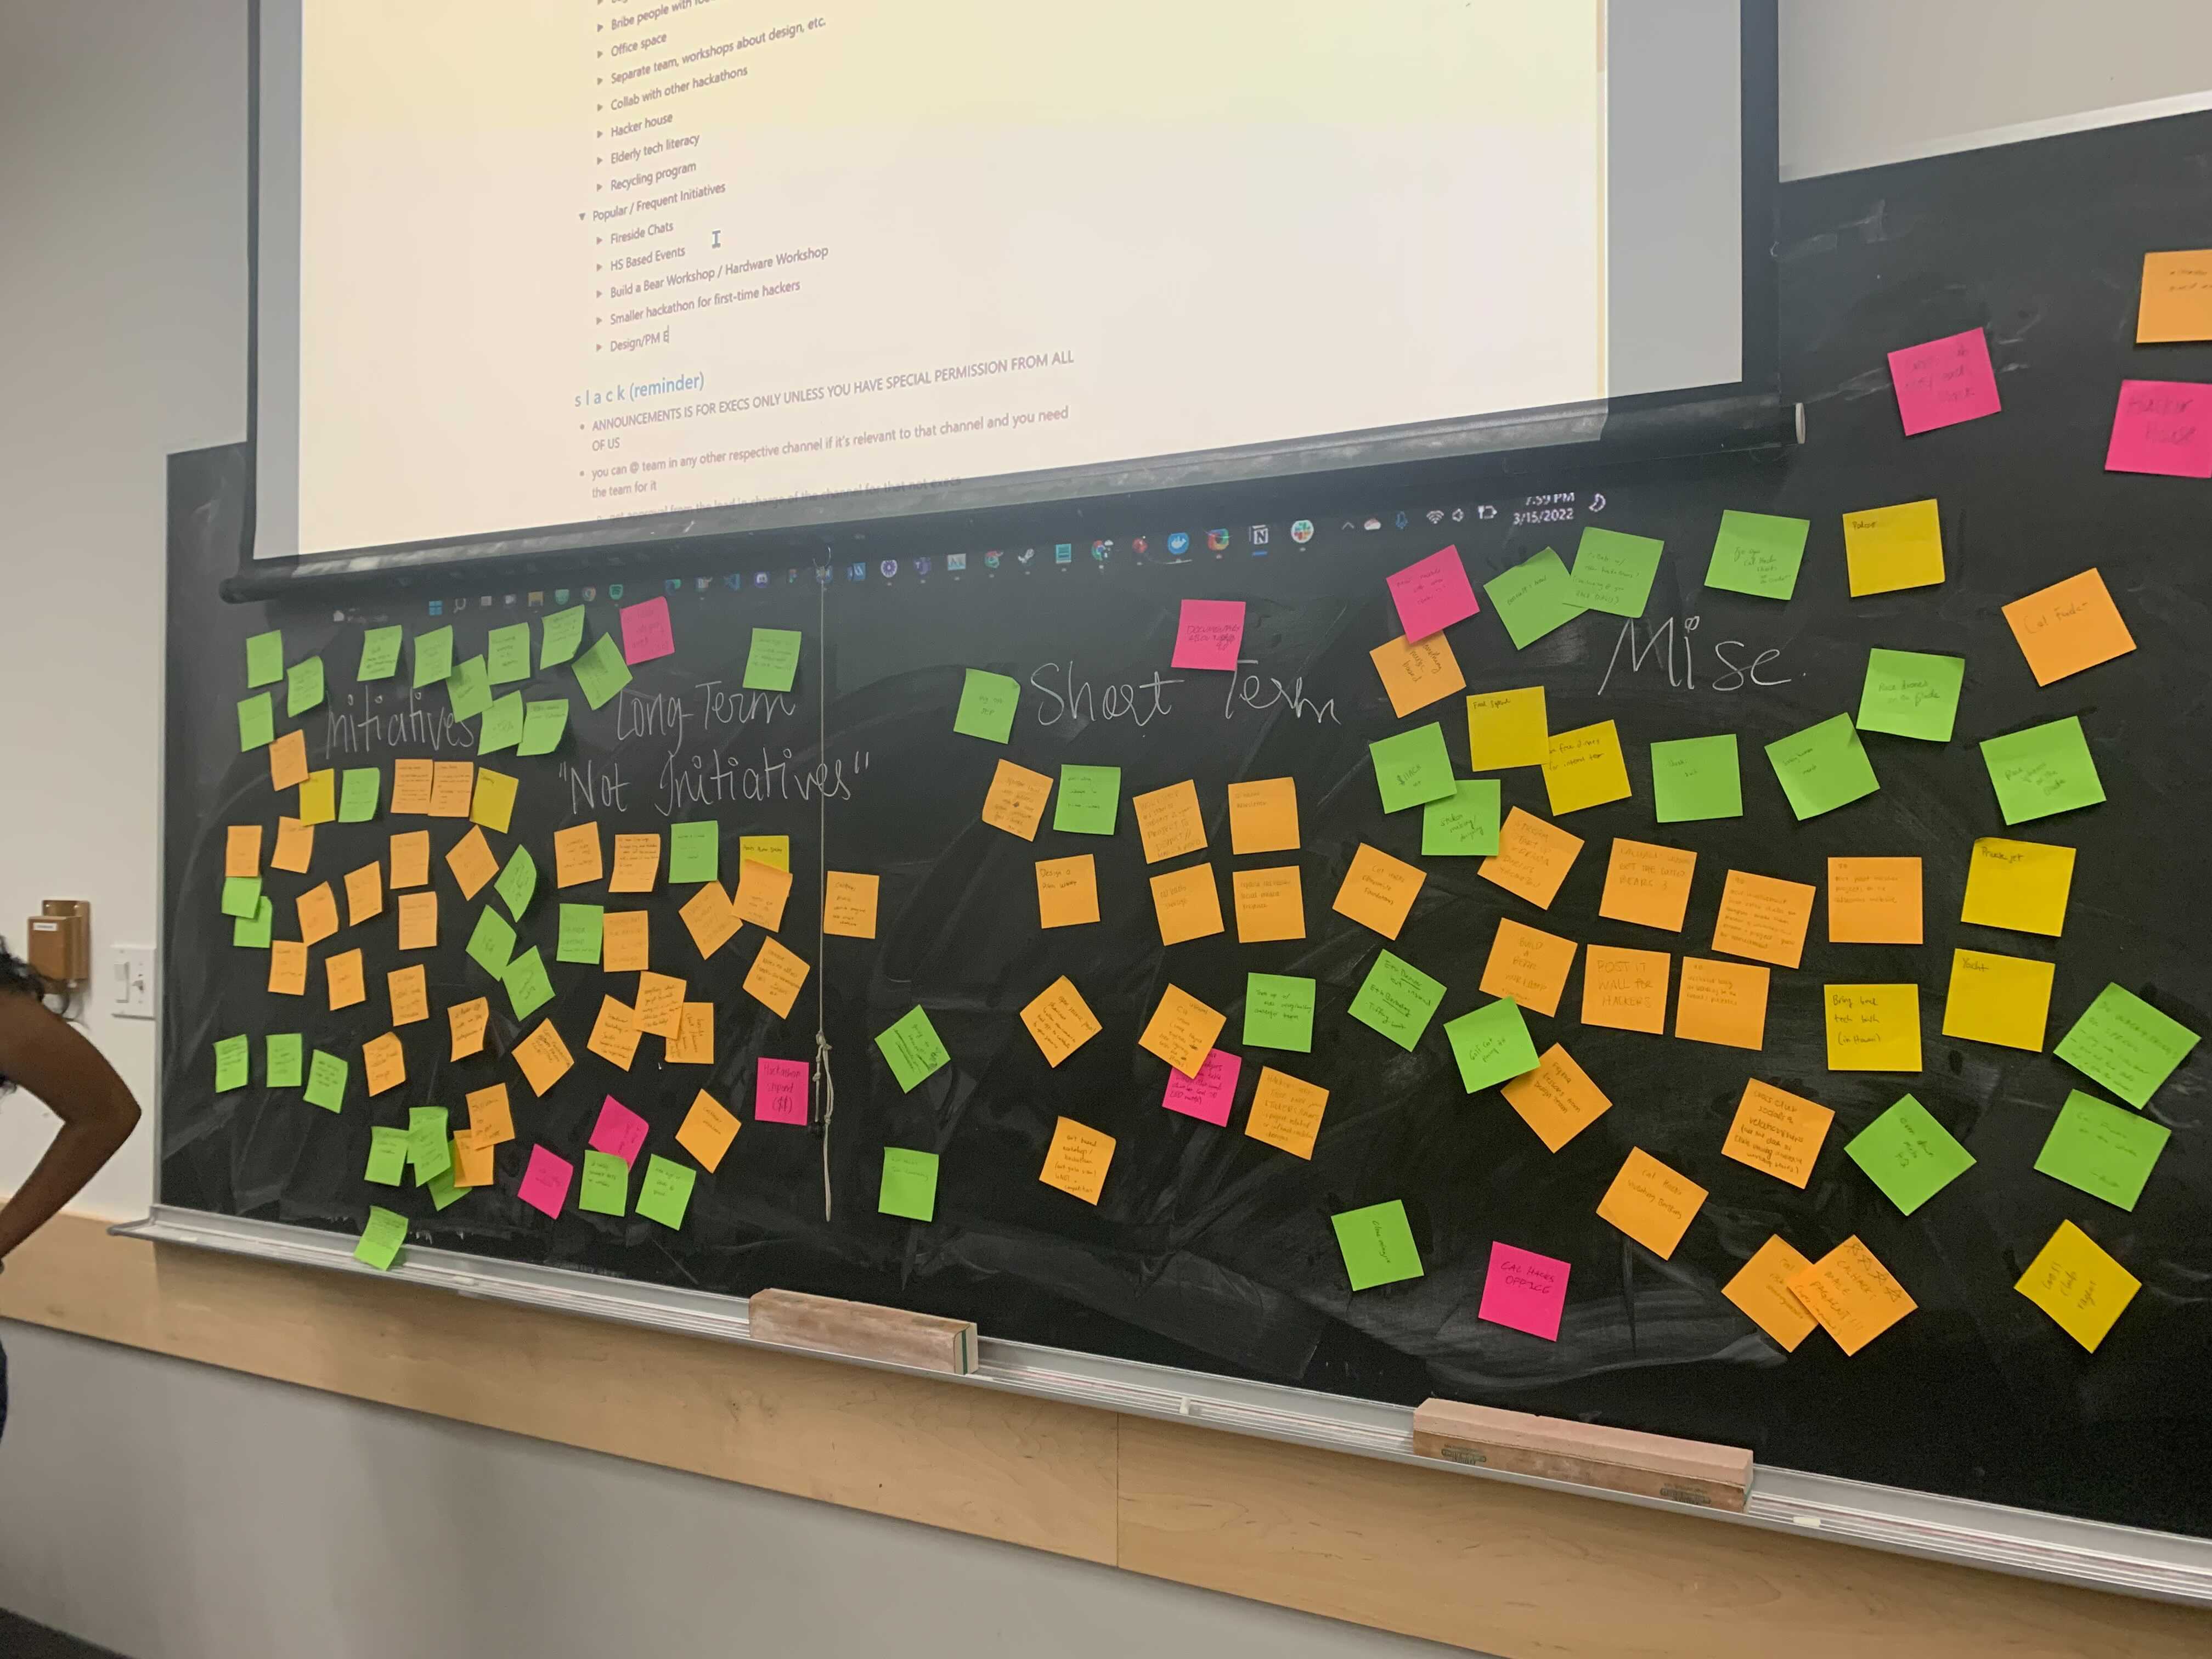 Big board with Stickies